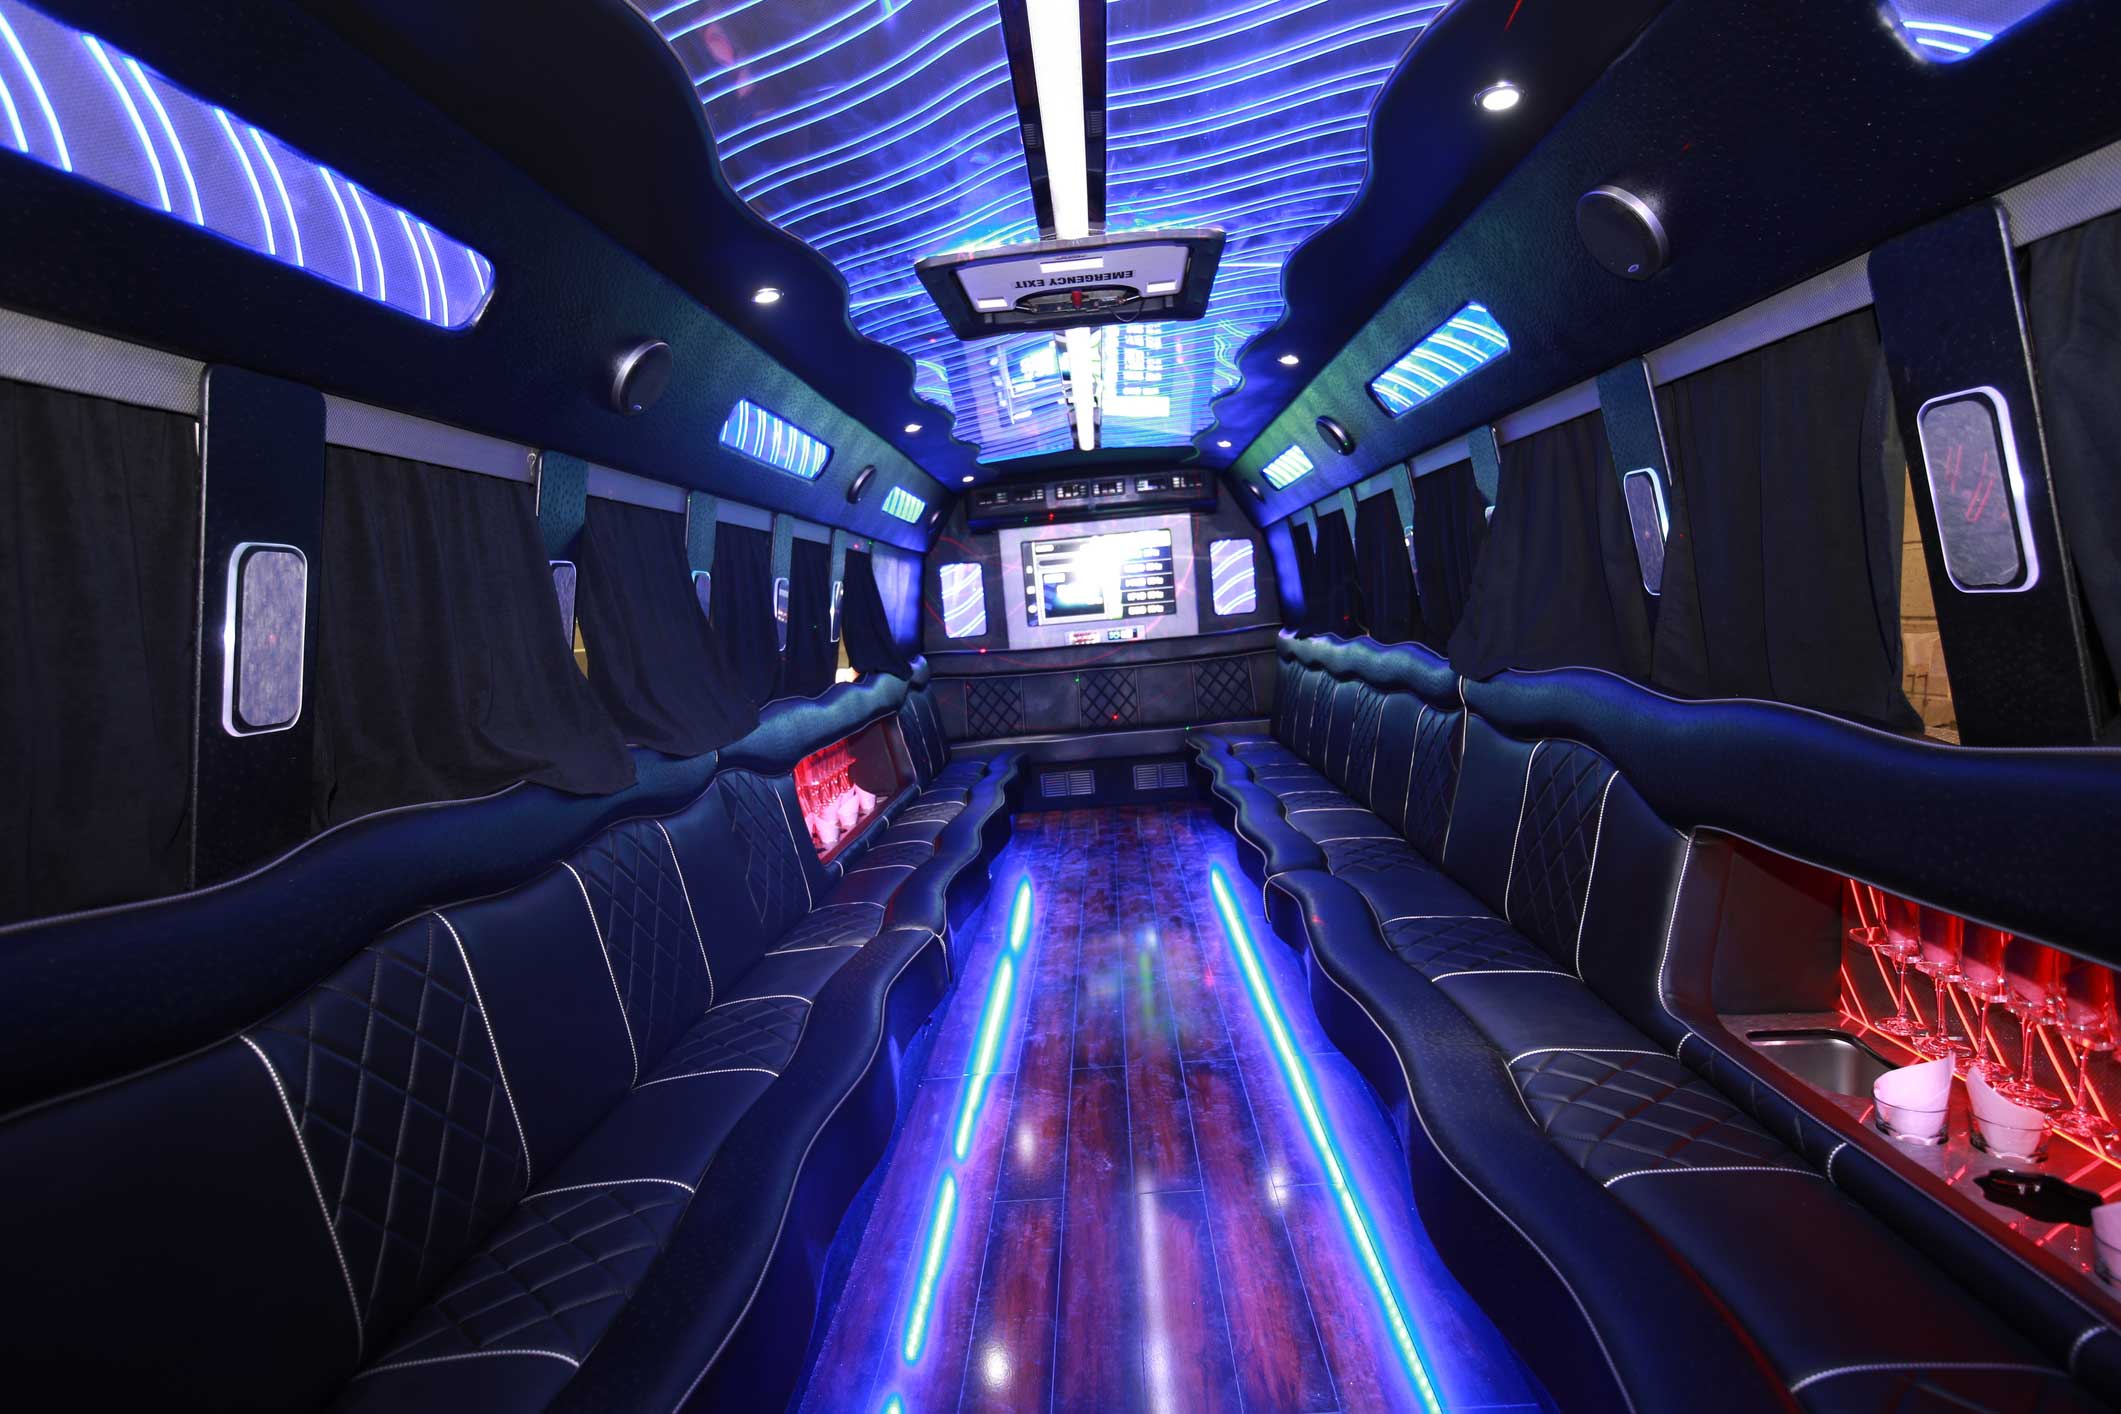 Party limo used for special occasions like cavs game, indians game, prom, wedding, or any type of limo service